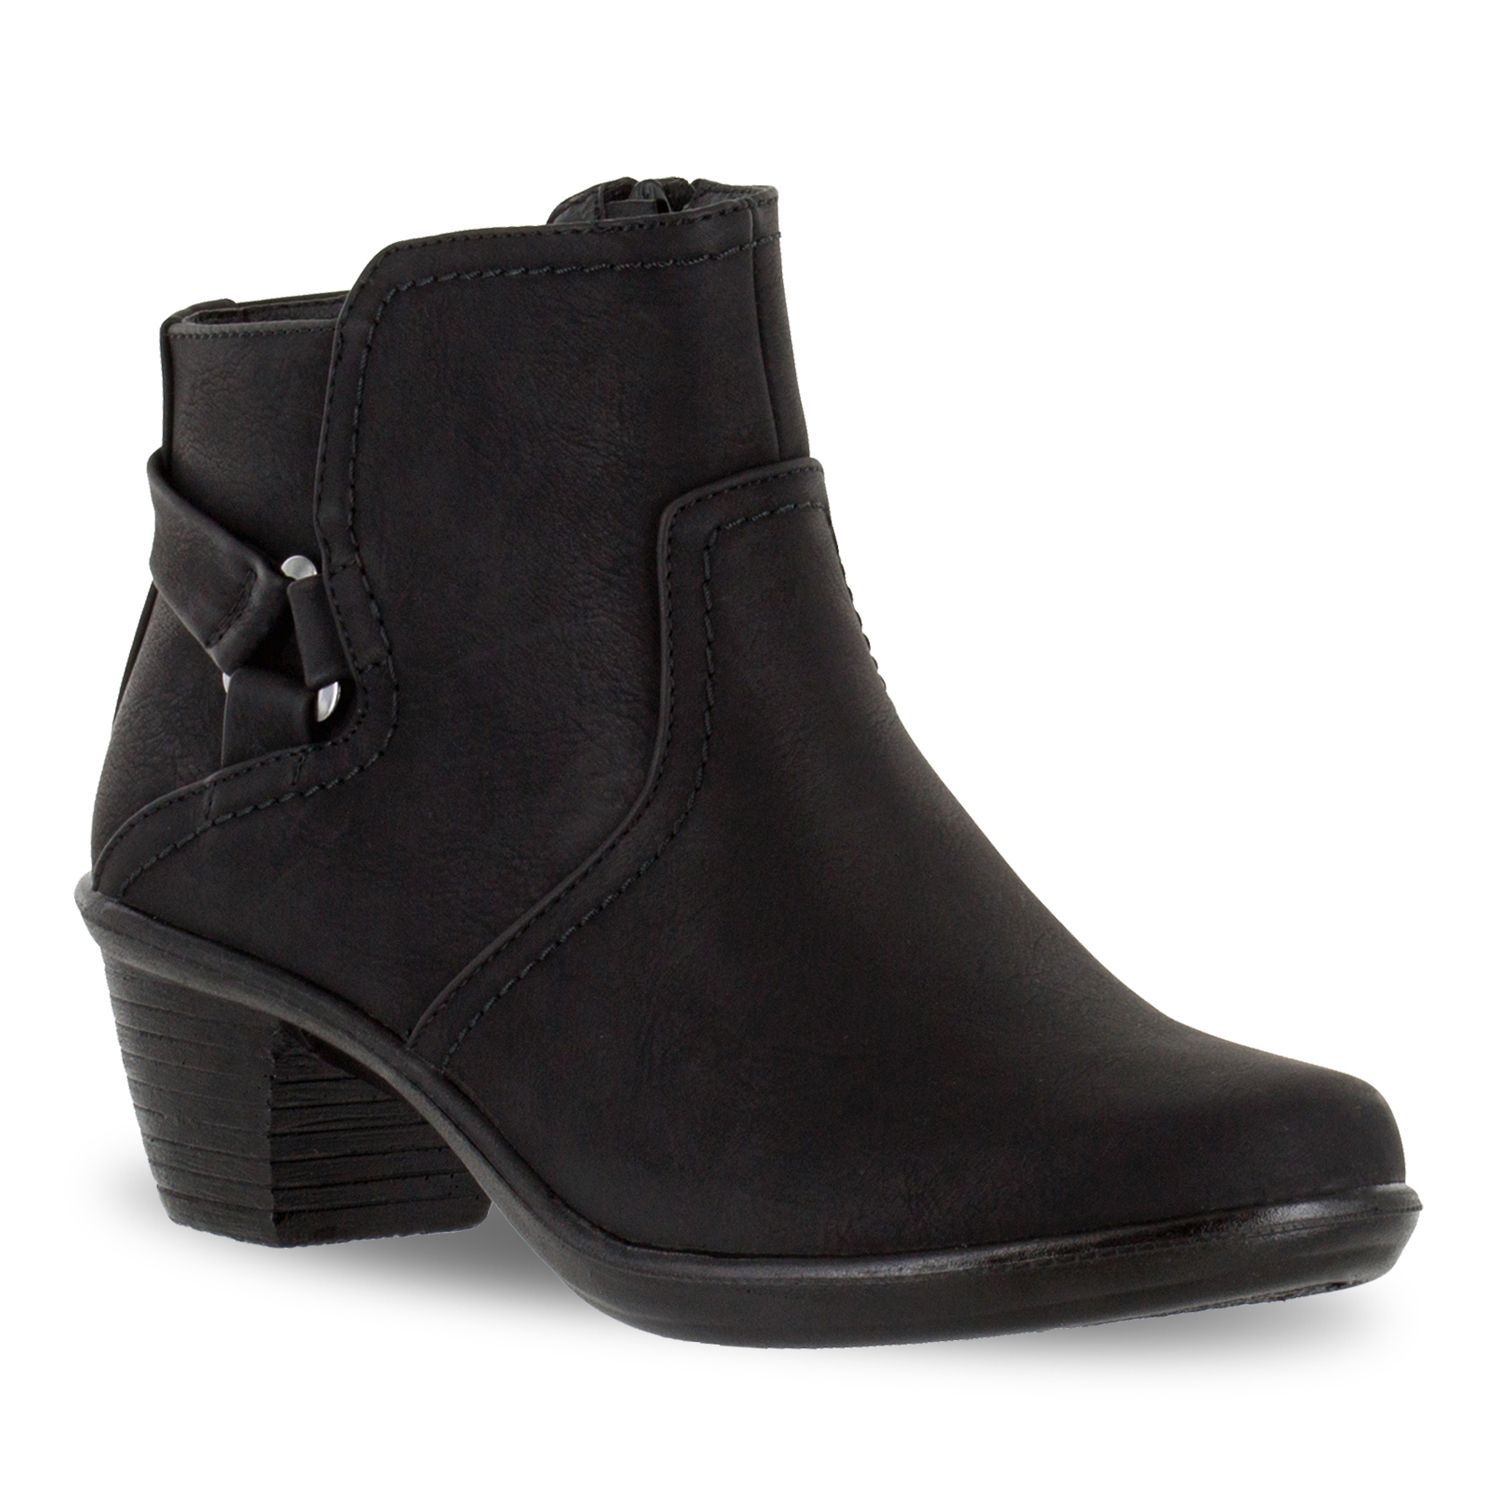 extra wide womens booties